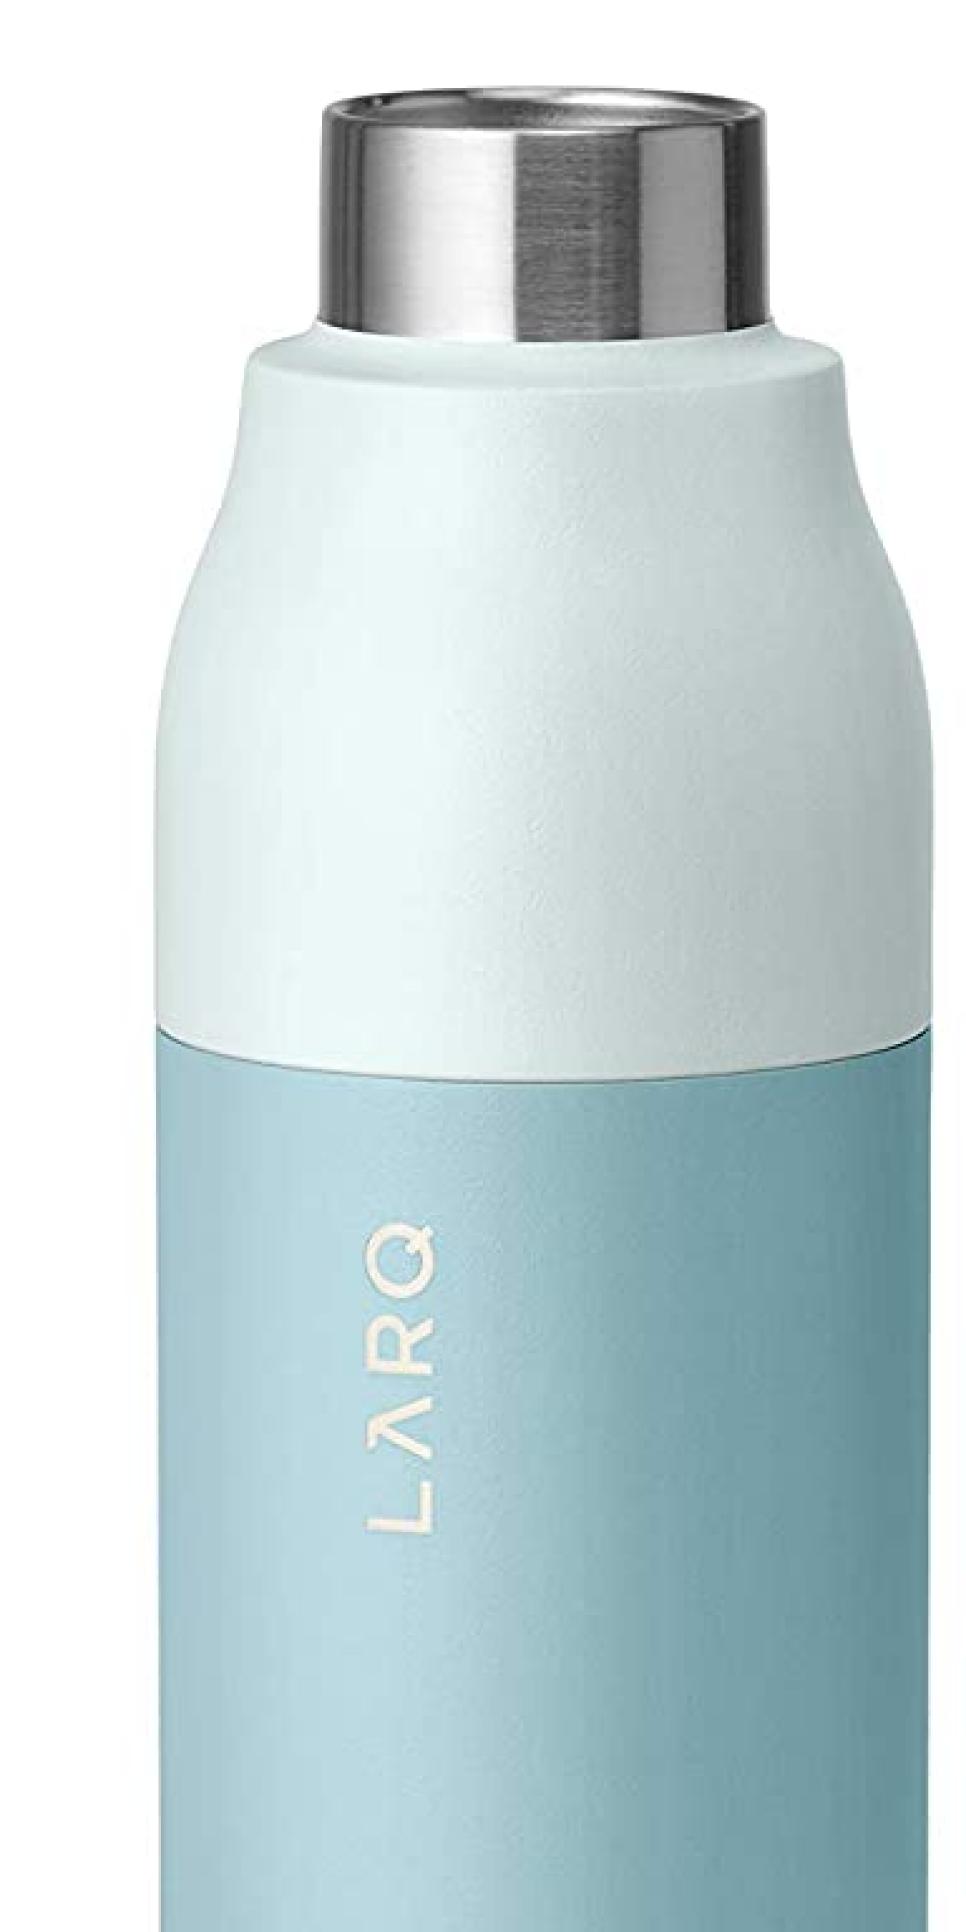 rx-amazonlarq-insulated-self-cleaning-and-stainless-steel-water-bottle-with-uv-water-purifier.jpeg